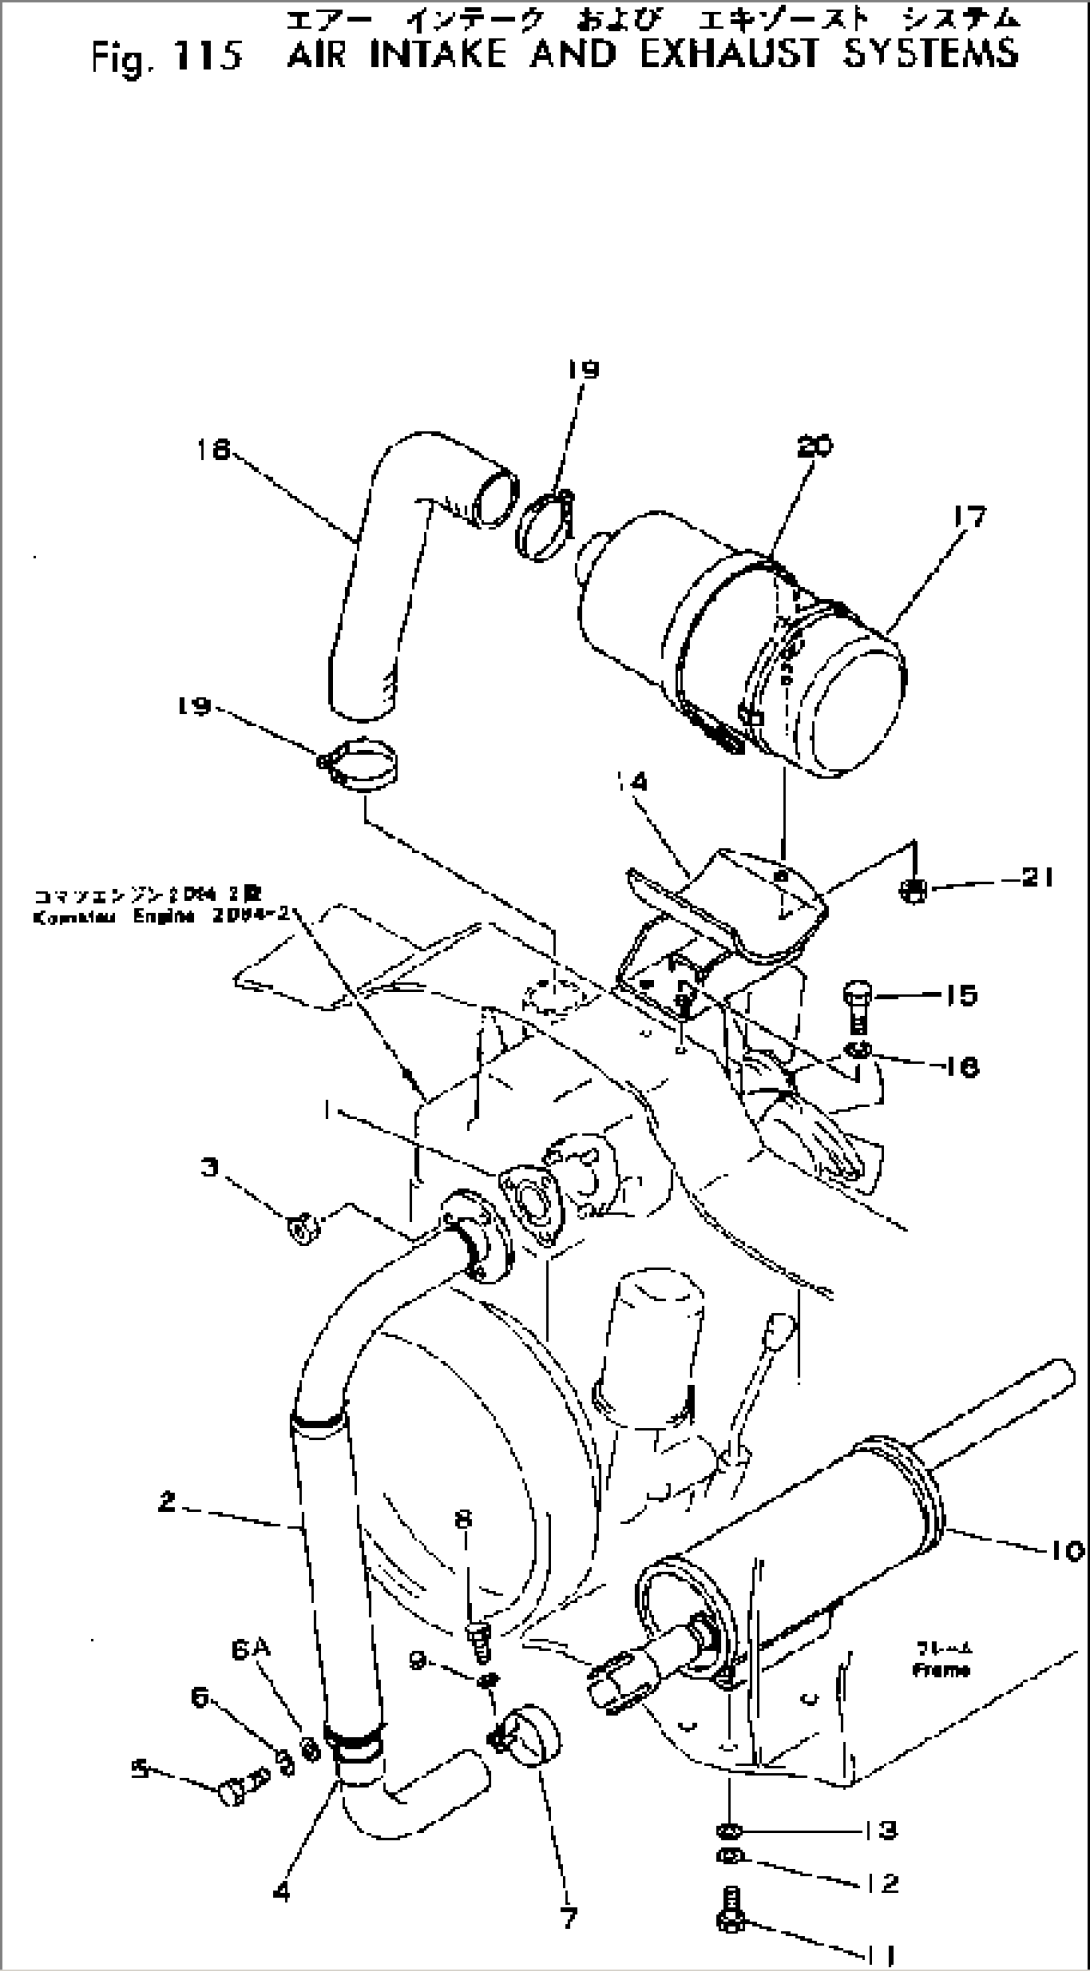 AIR INTAKE AND EXHAUST SYSTEM